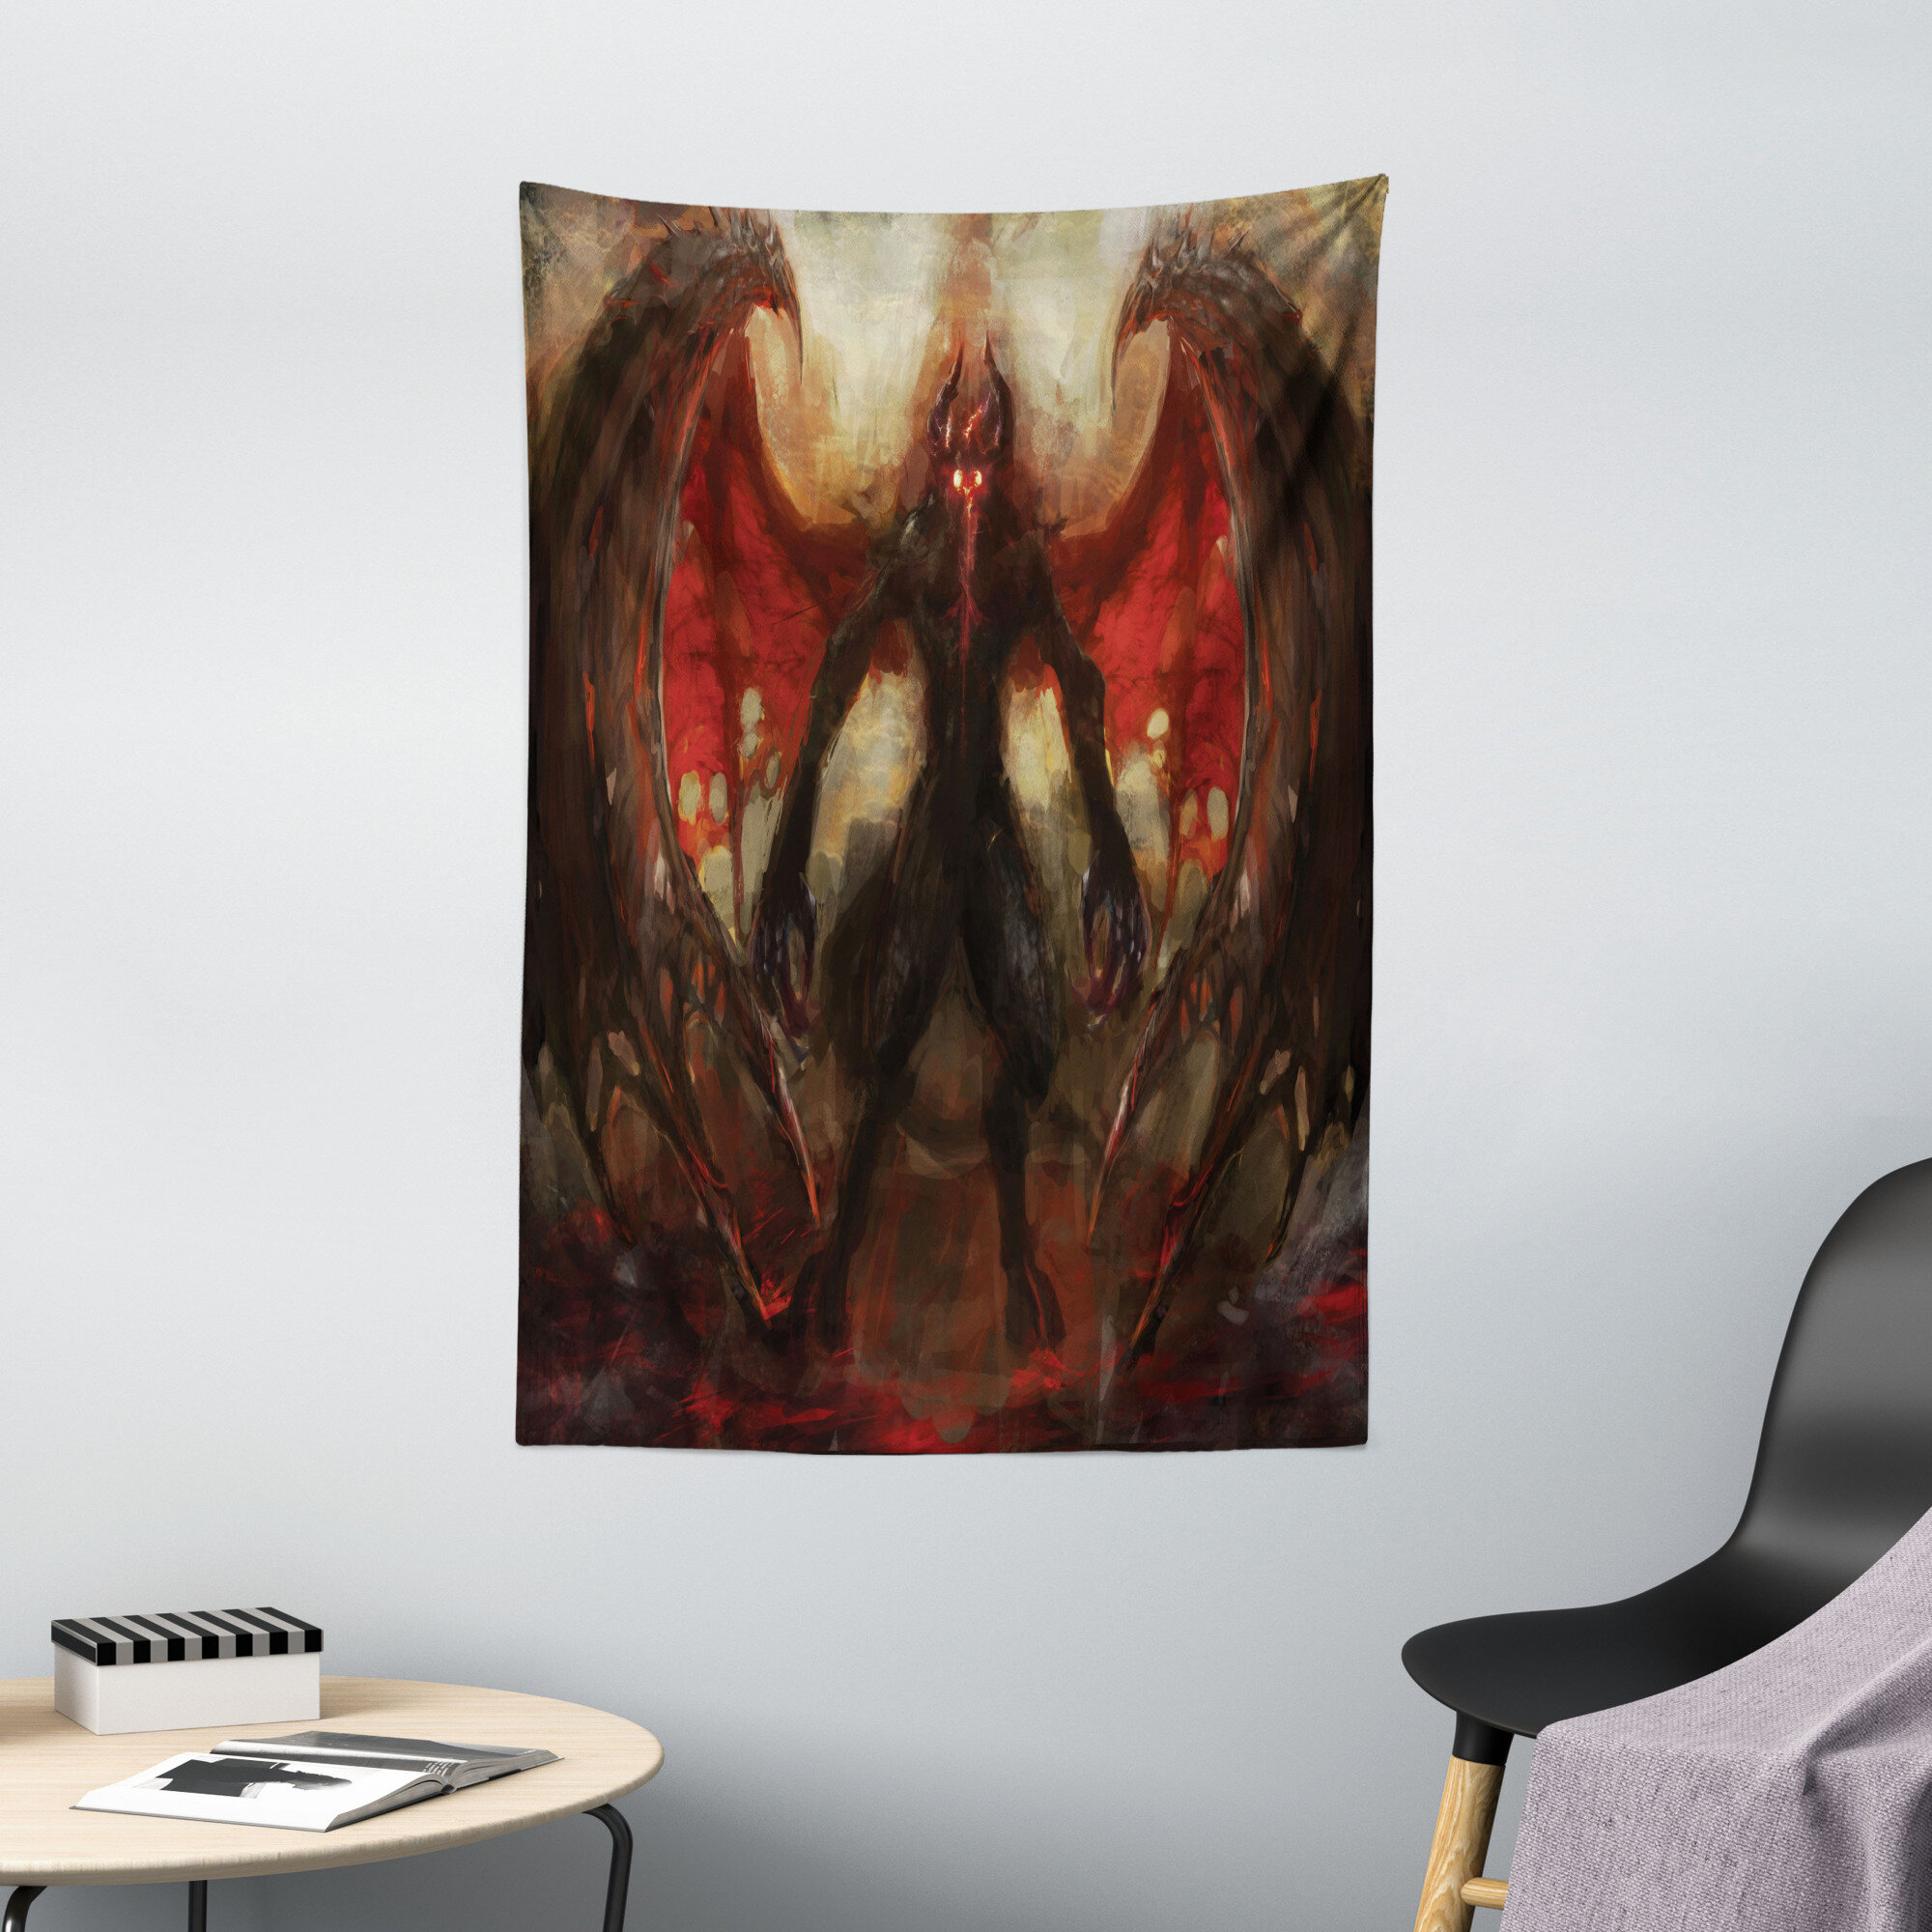 Bless international Ambesonne Fantasy World Tapestry, Devil Shadow With  Wings Primary Opponent Of Rising Hell Afterlife Image, Wall Hanging For Bedroom  Living Room Dorm Decor Wayfair Canada